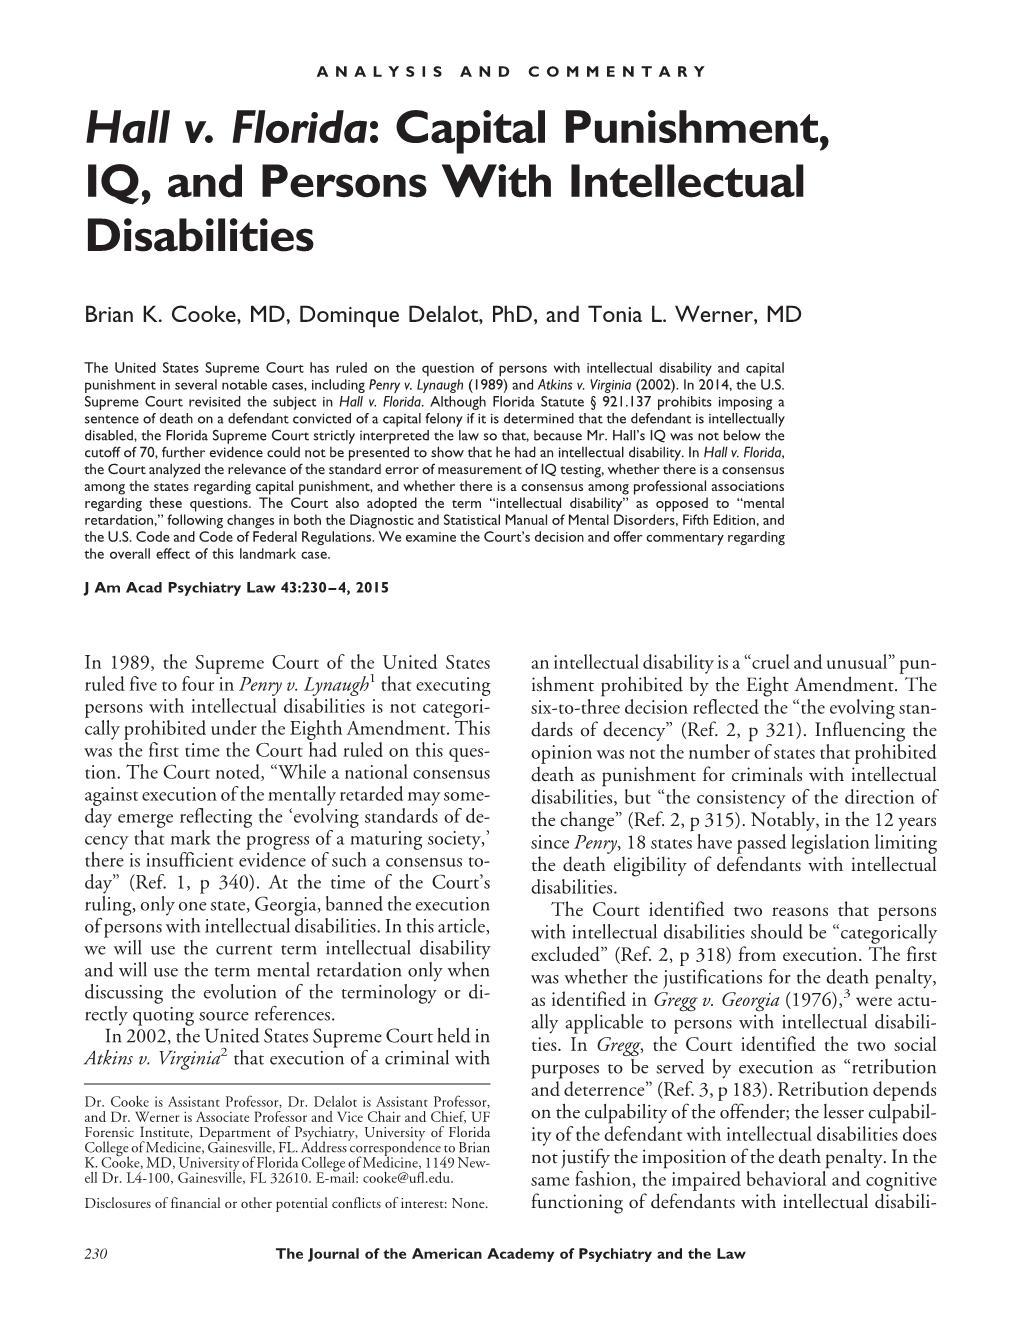 Capital Punishment, IQ, and Persons with Intellectual Disabilities